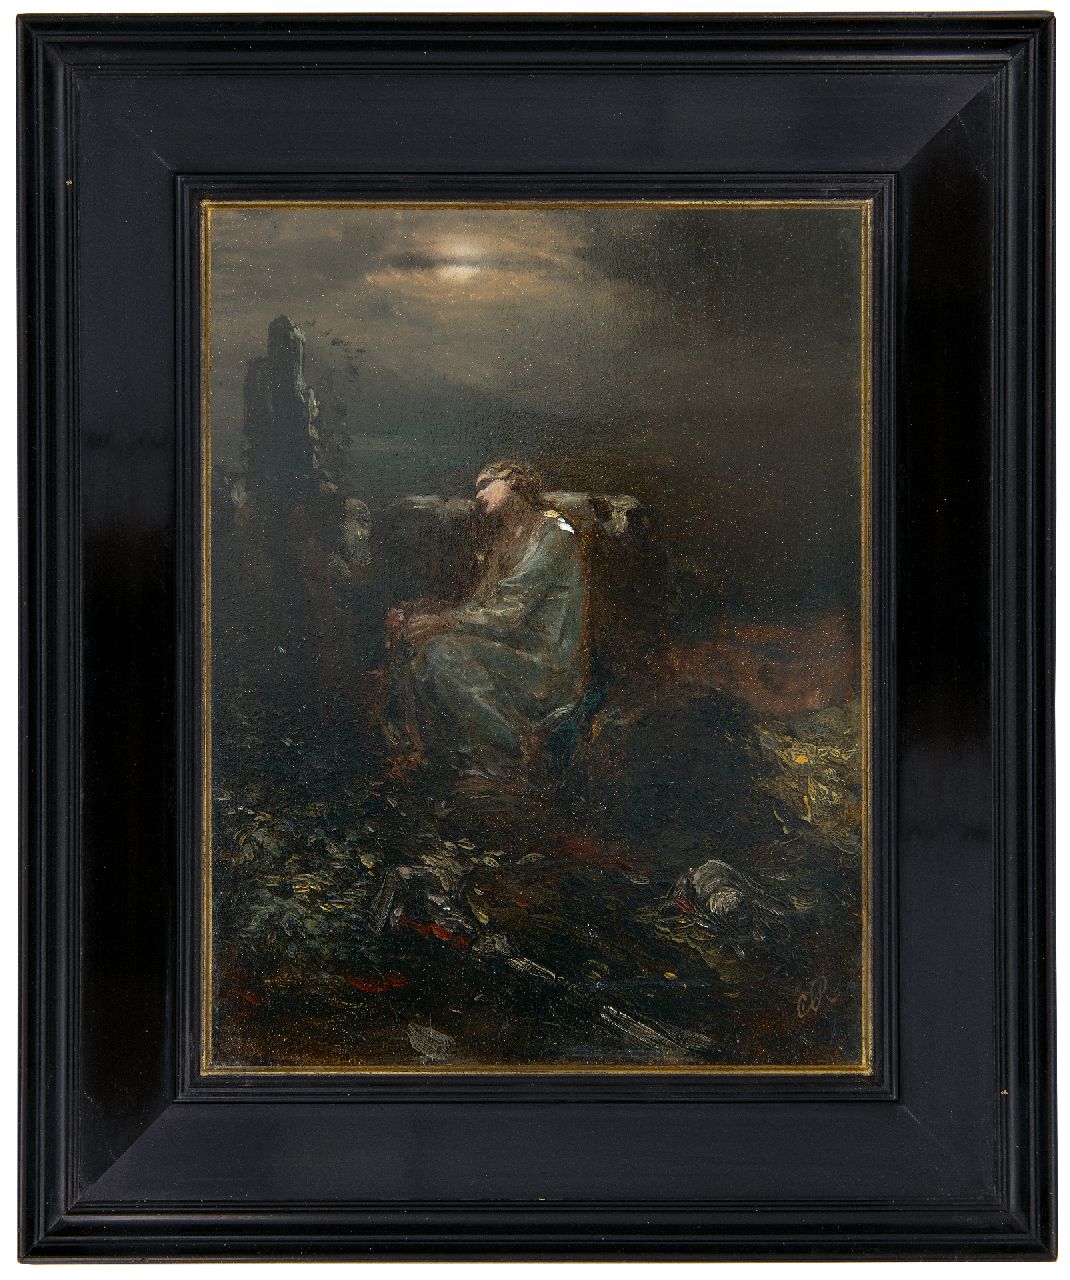 Rochussen Ch.  | Charles Rochussen | Paintings offered for sale | In the ruins, oil on panel 22.7 x 17.5 cm, signed l.r. with monogram and in label on the reverse and painted ca. 1845